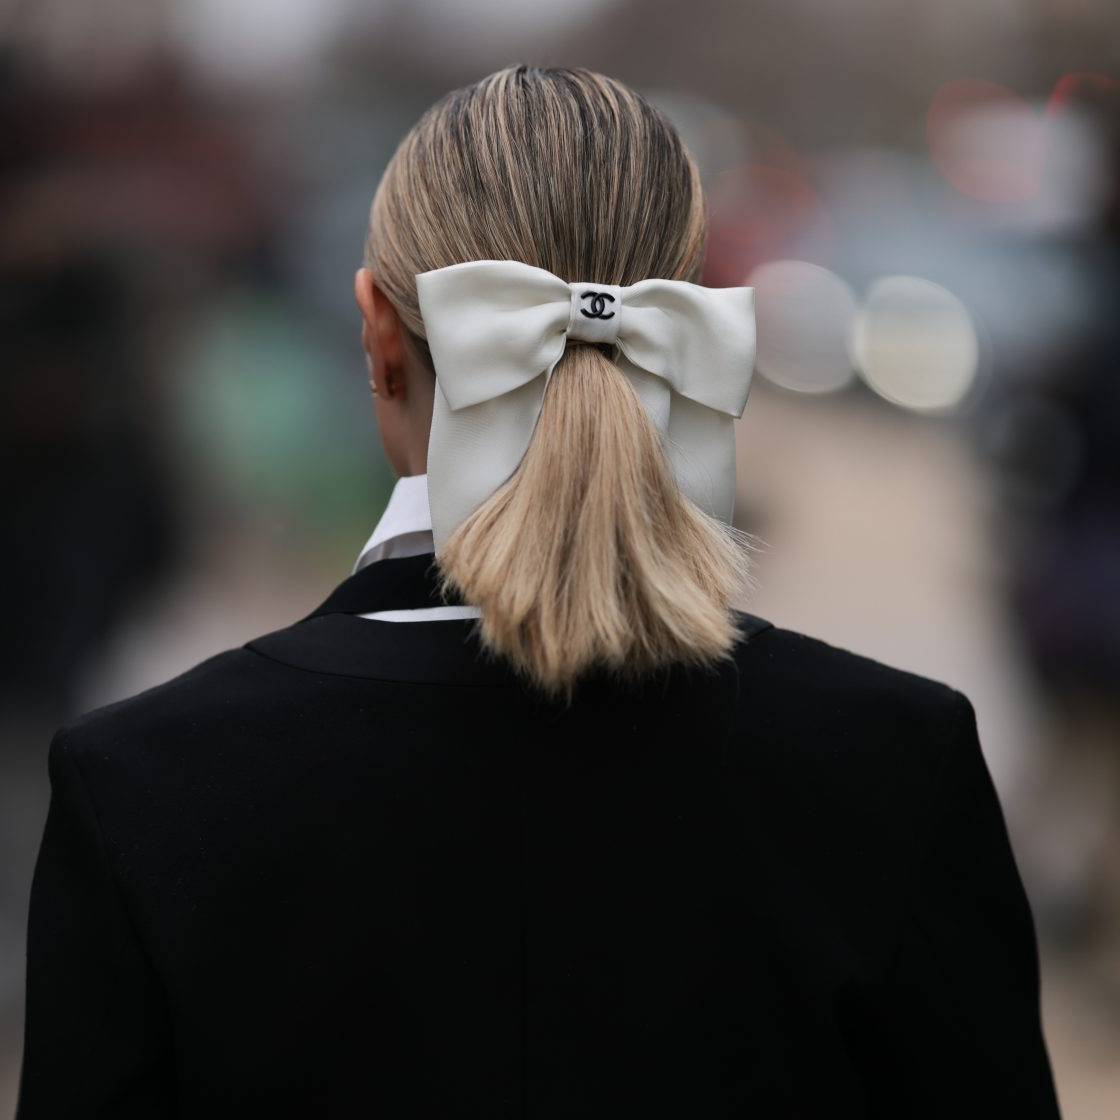 Hair bows are this season's must-have accessory